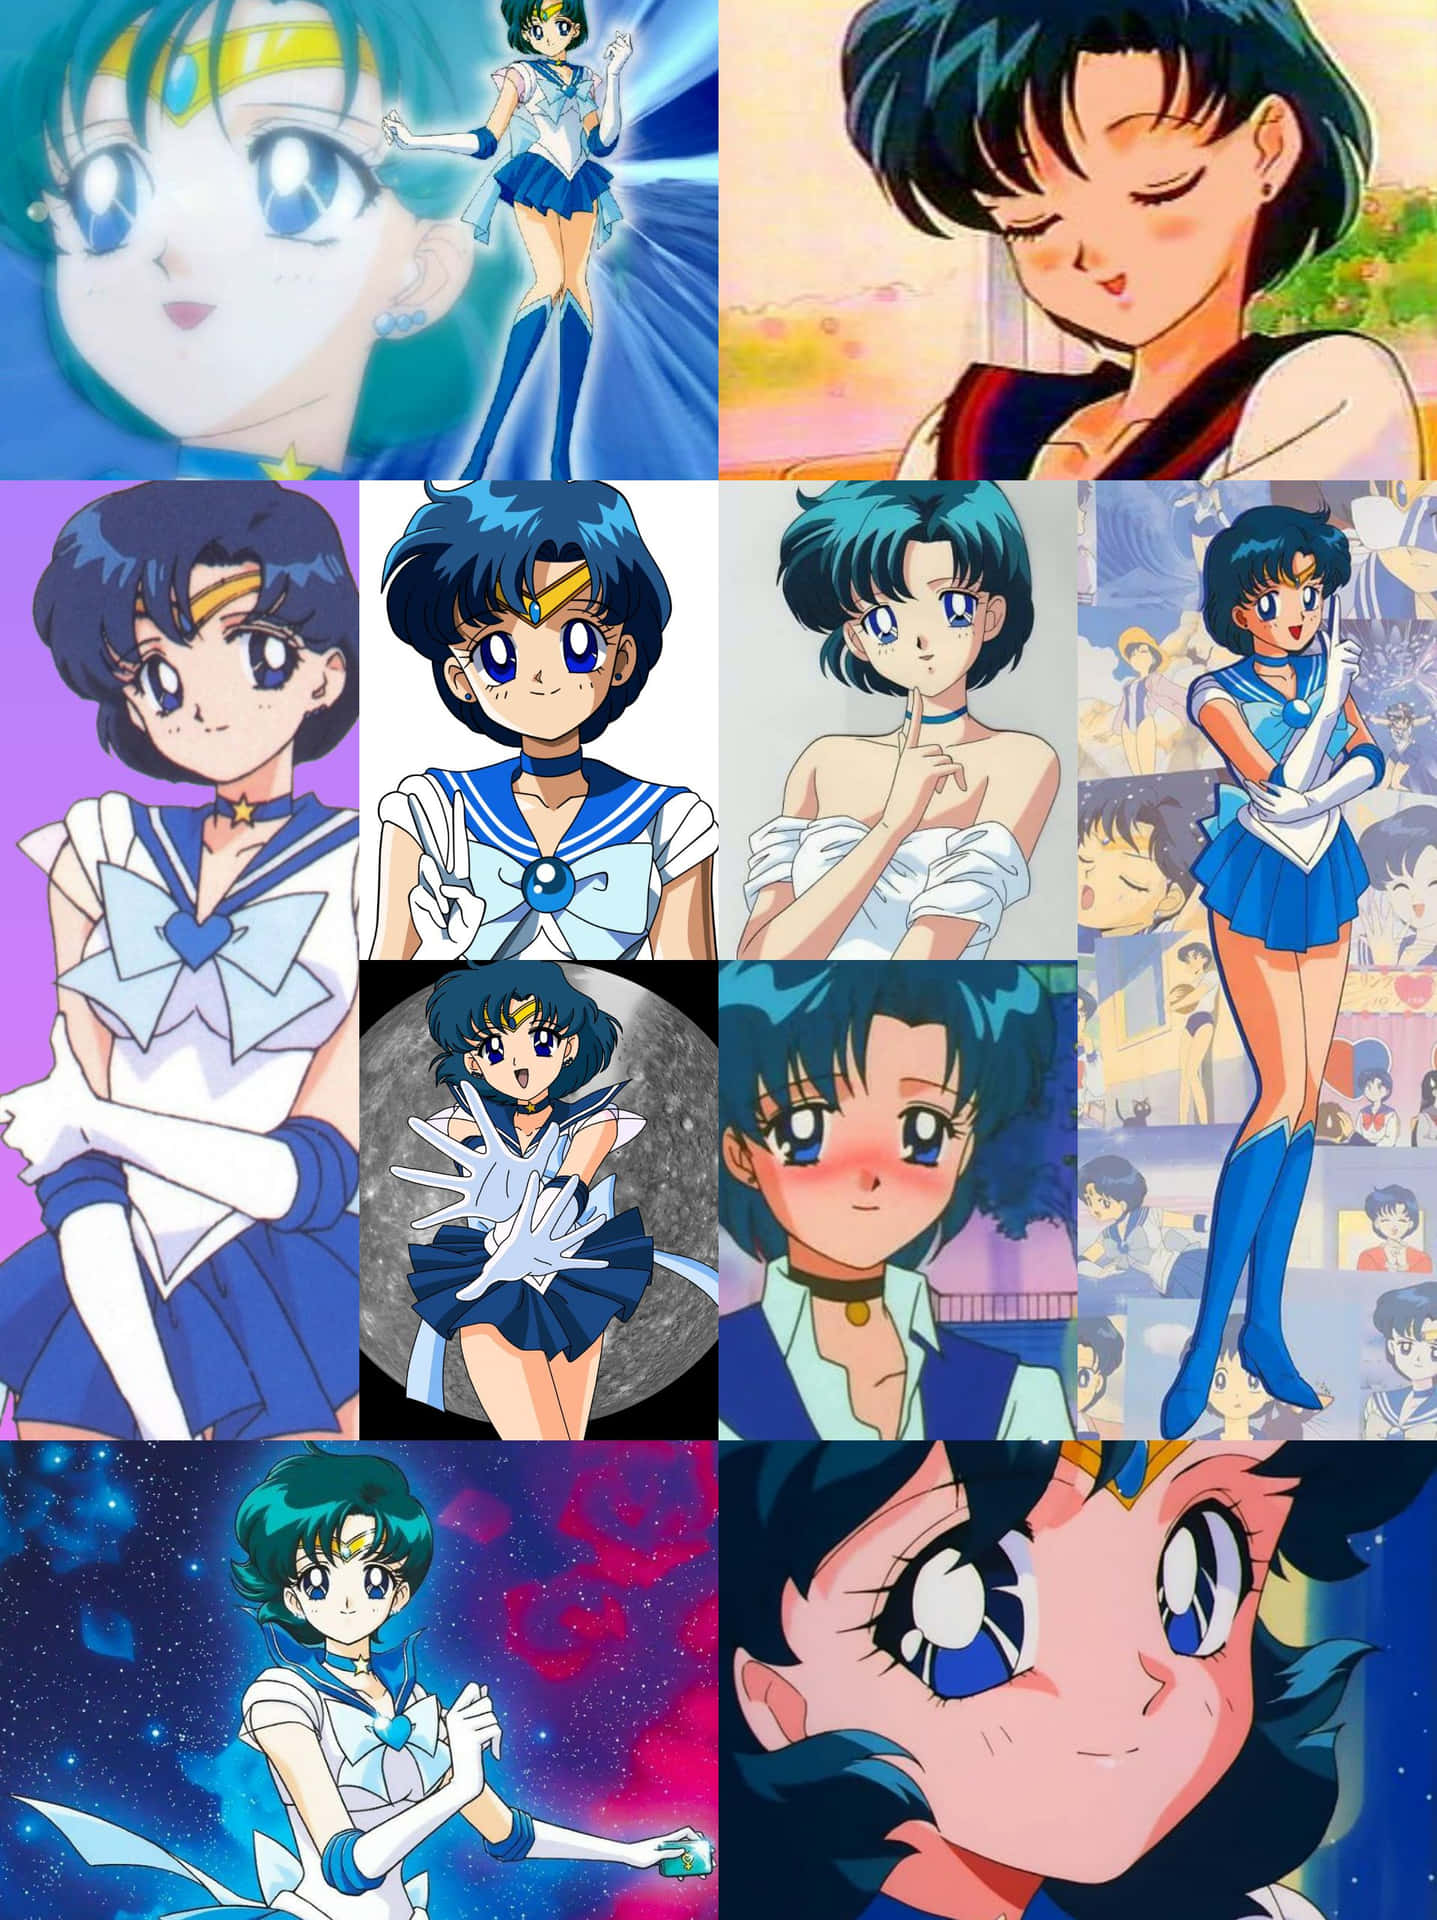 “who Will Save The Day? I Will, Sailor Mercury!”